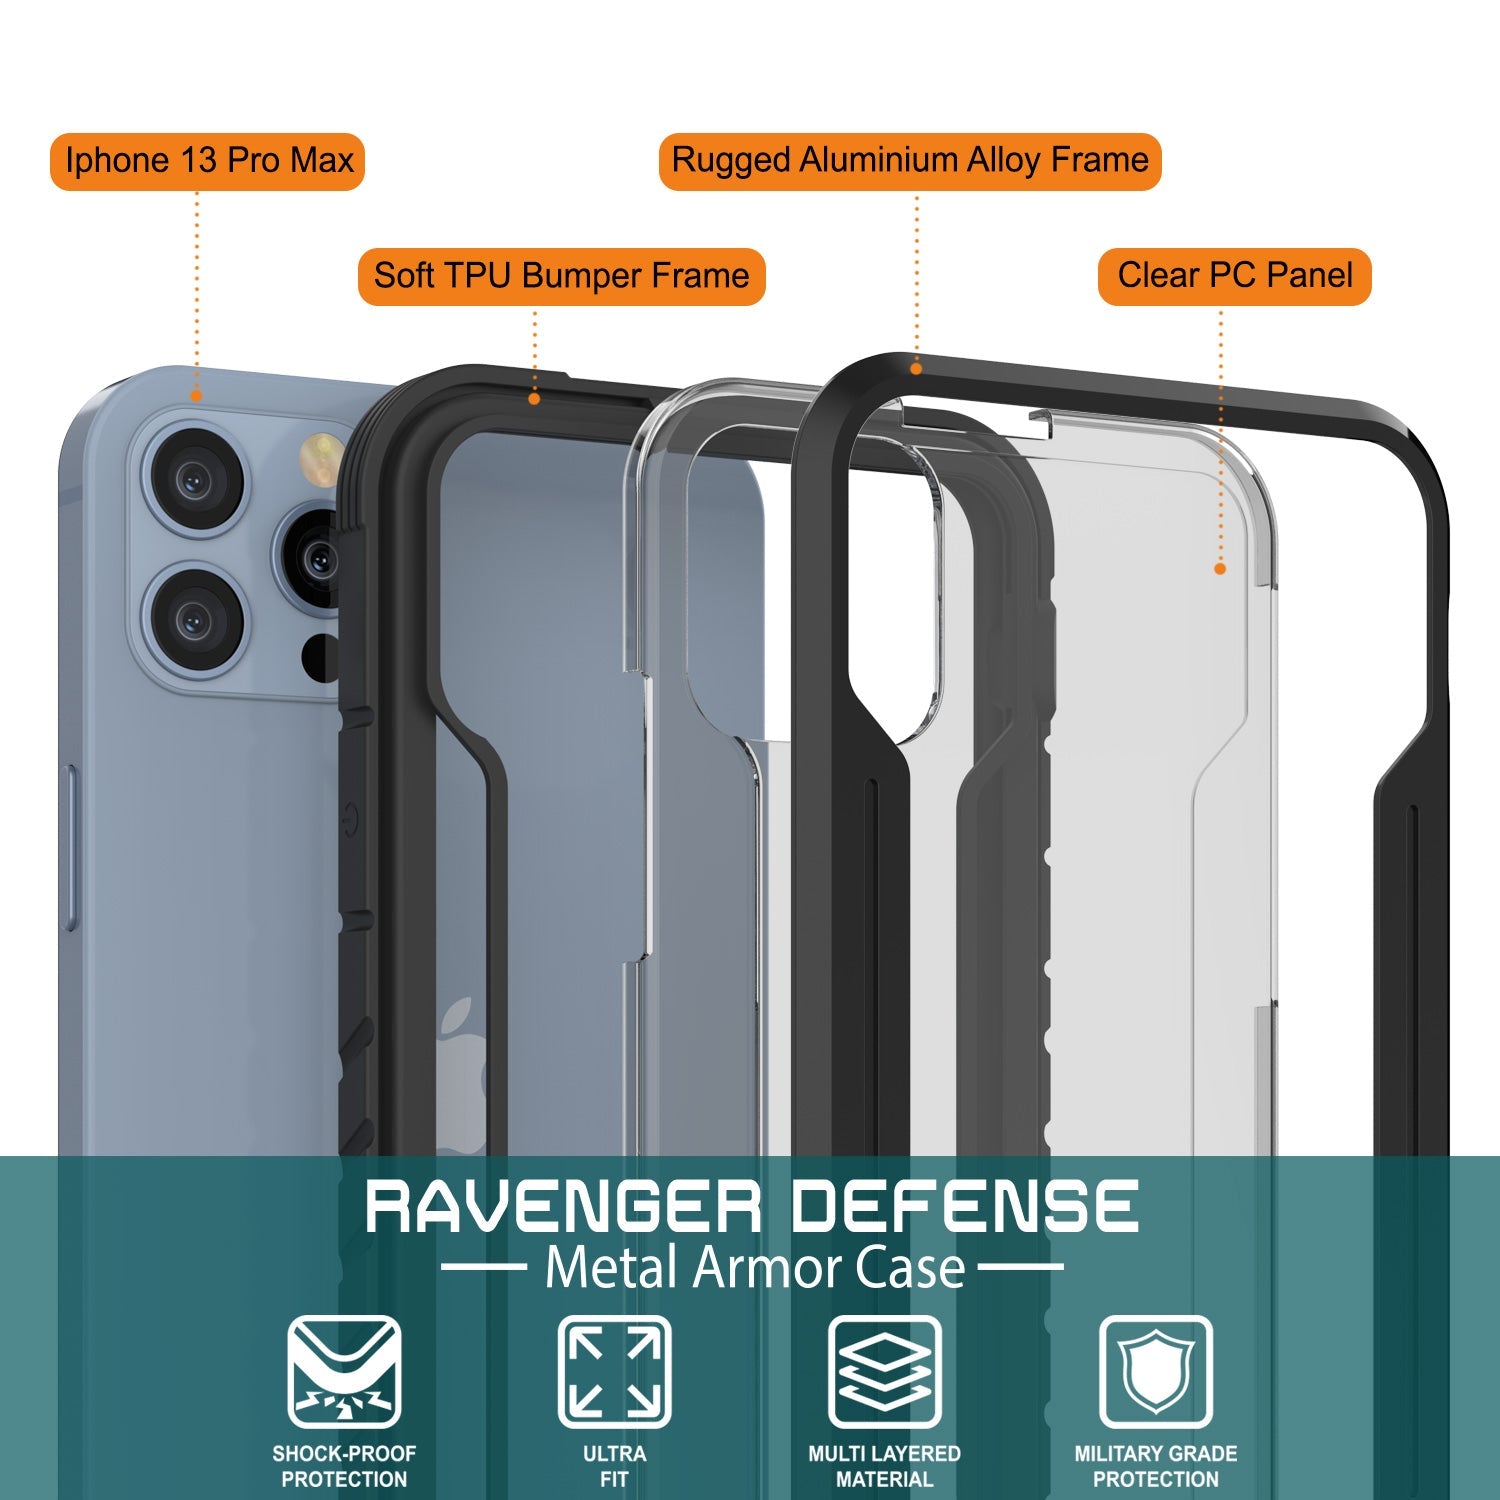 Punkcase iPhone 14 Pro Max Ravenger MAG Defense Case Protective Military Grade Multilayer Cover [Black]